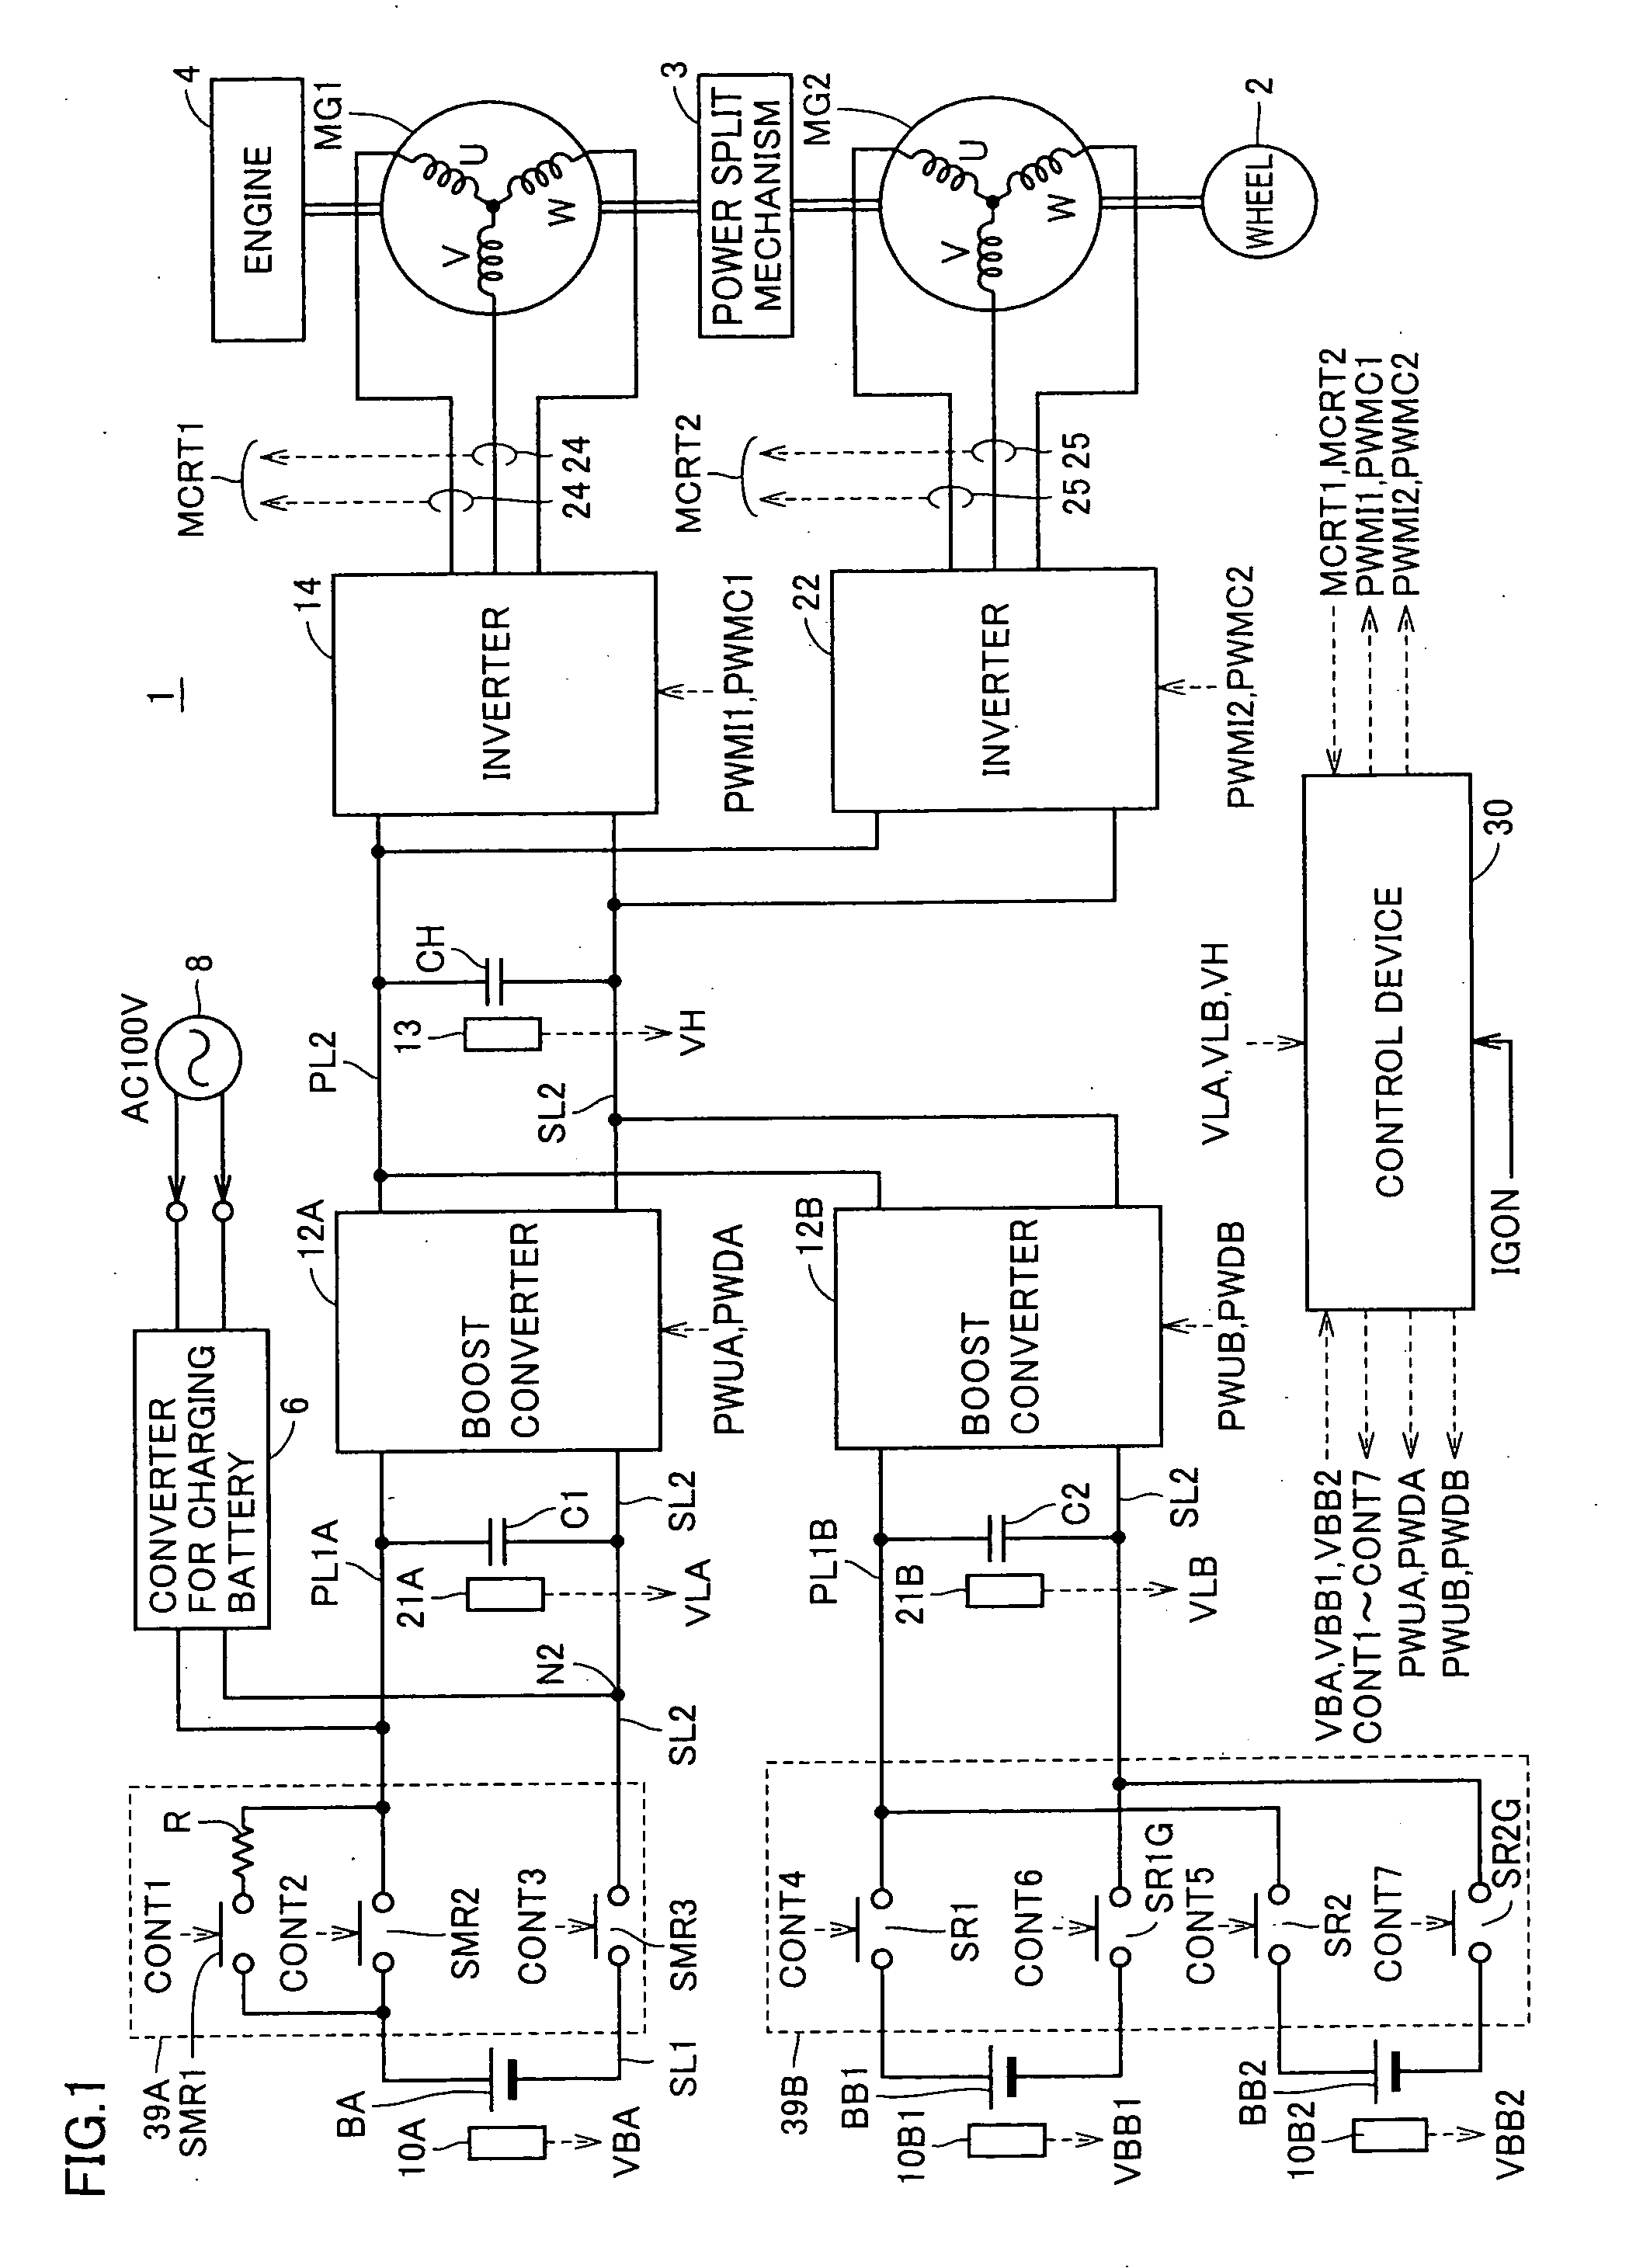 Vehicle power supply apparatus, and vehicle